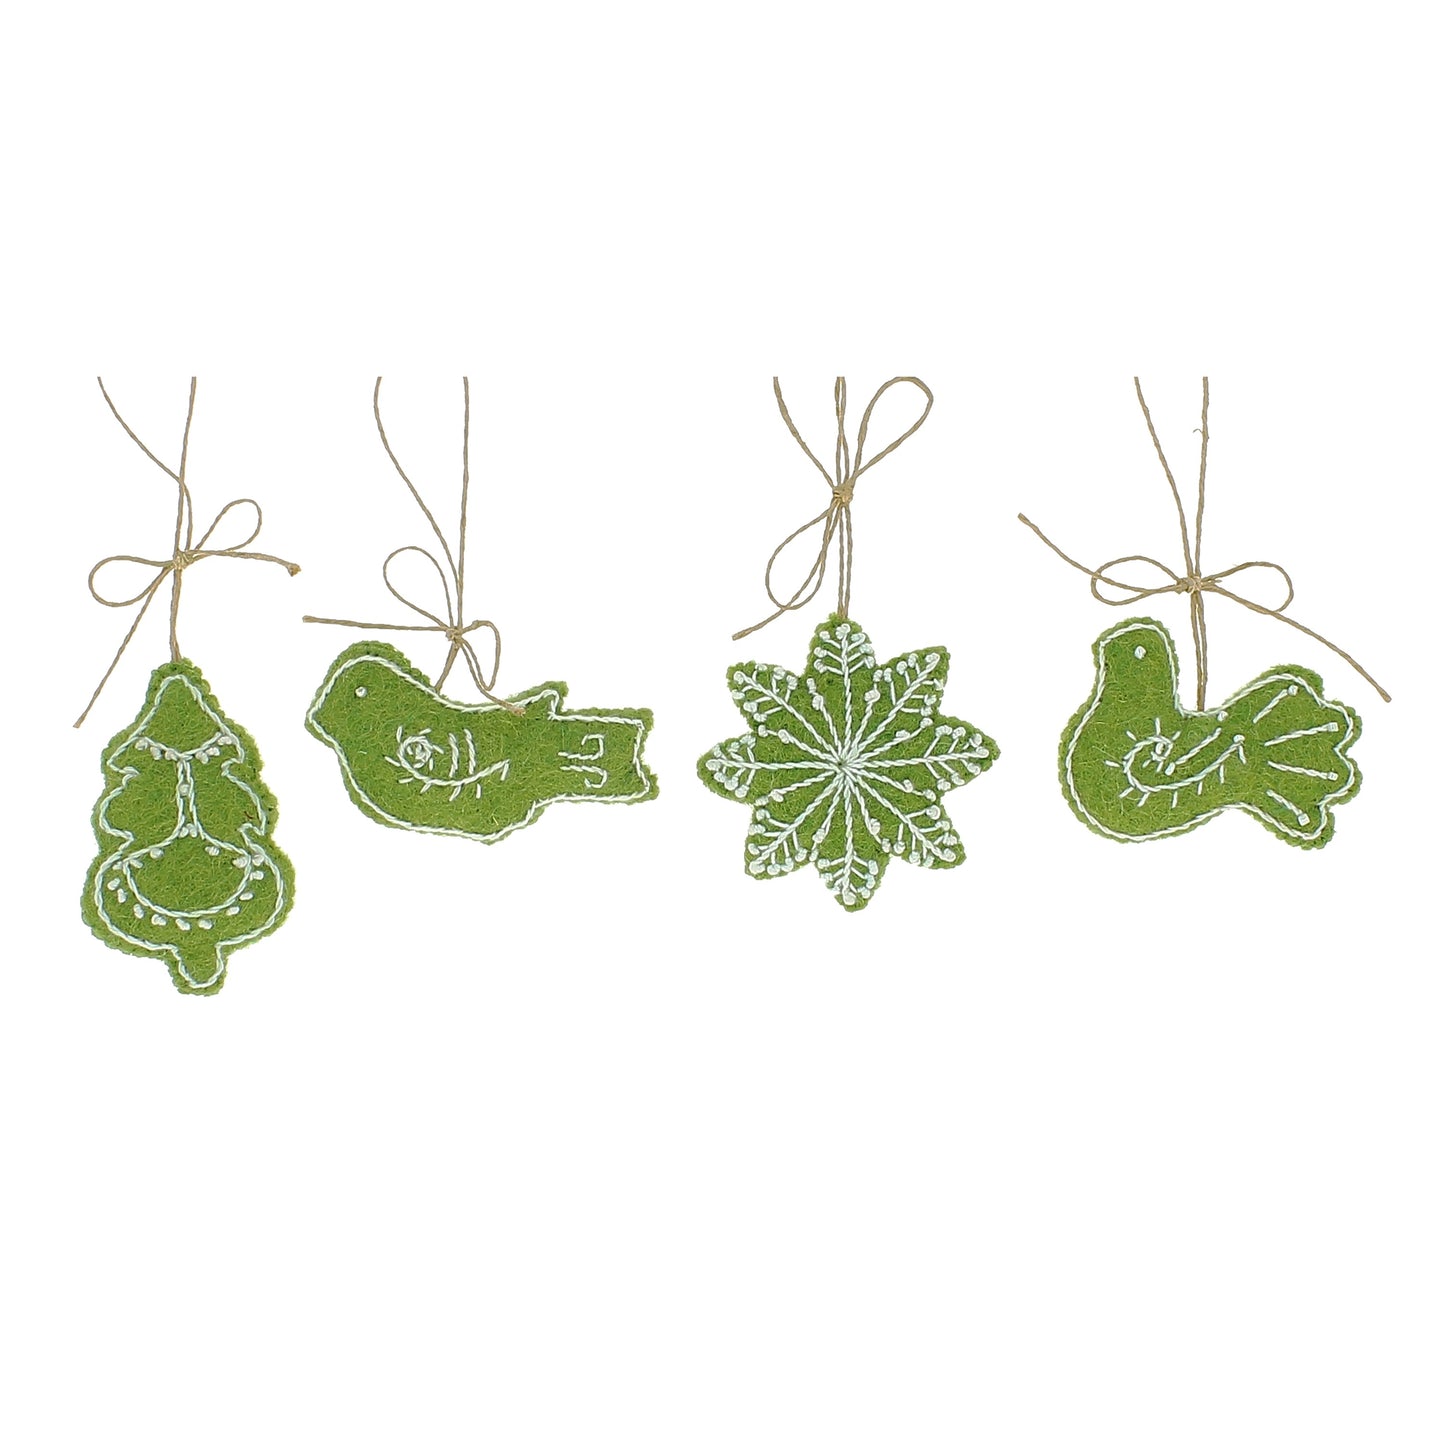 Gingerbread Hanging Decorations - Green - Set of 4